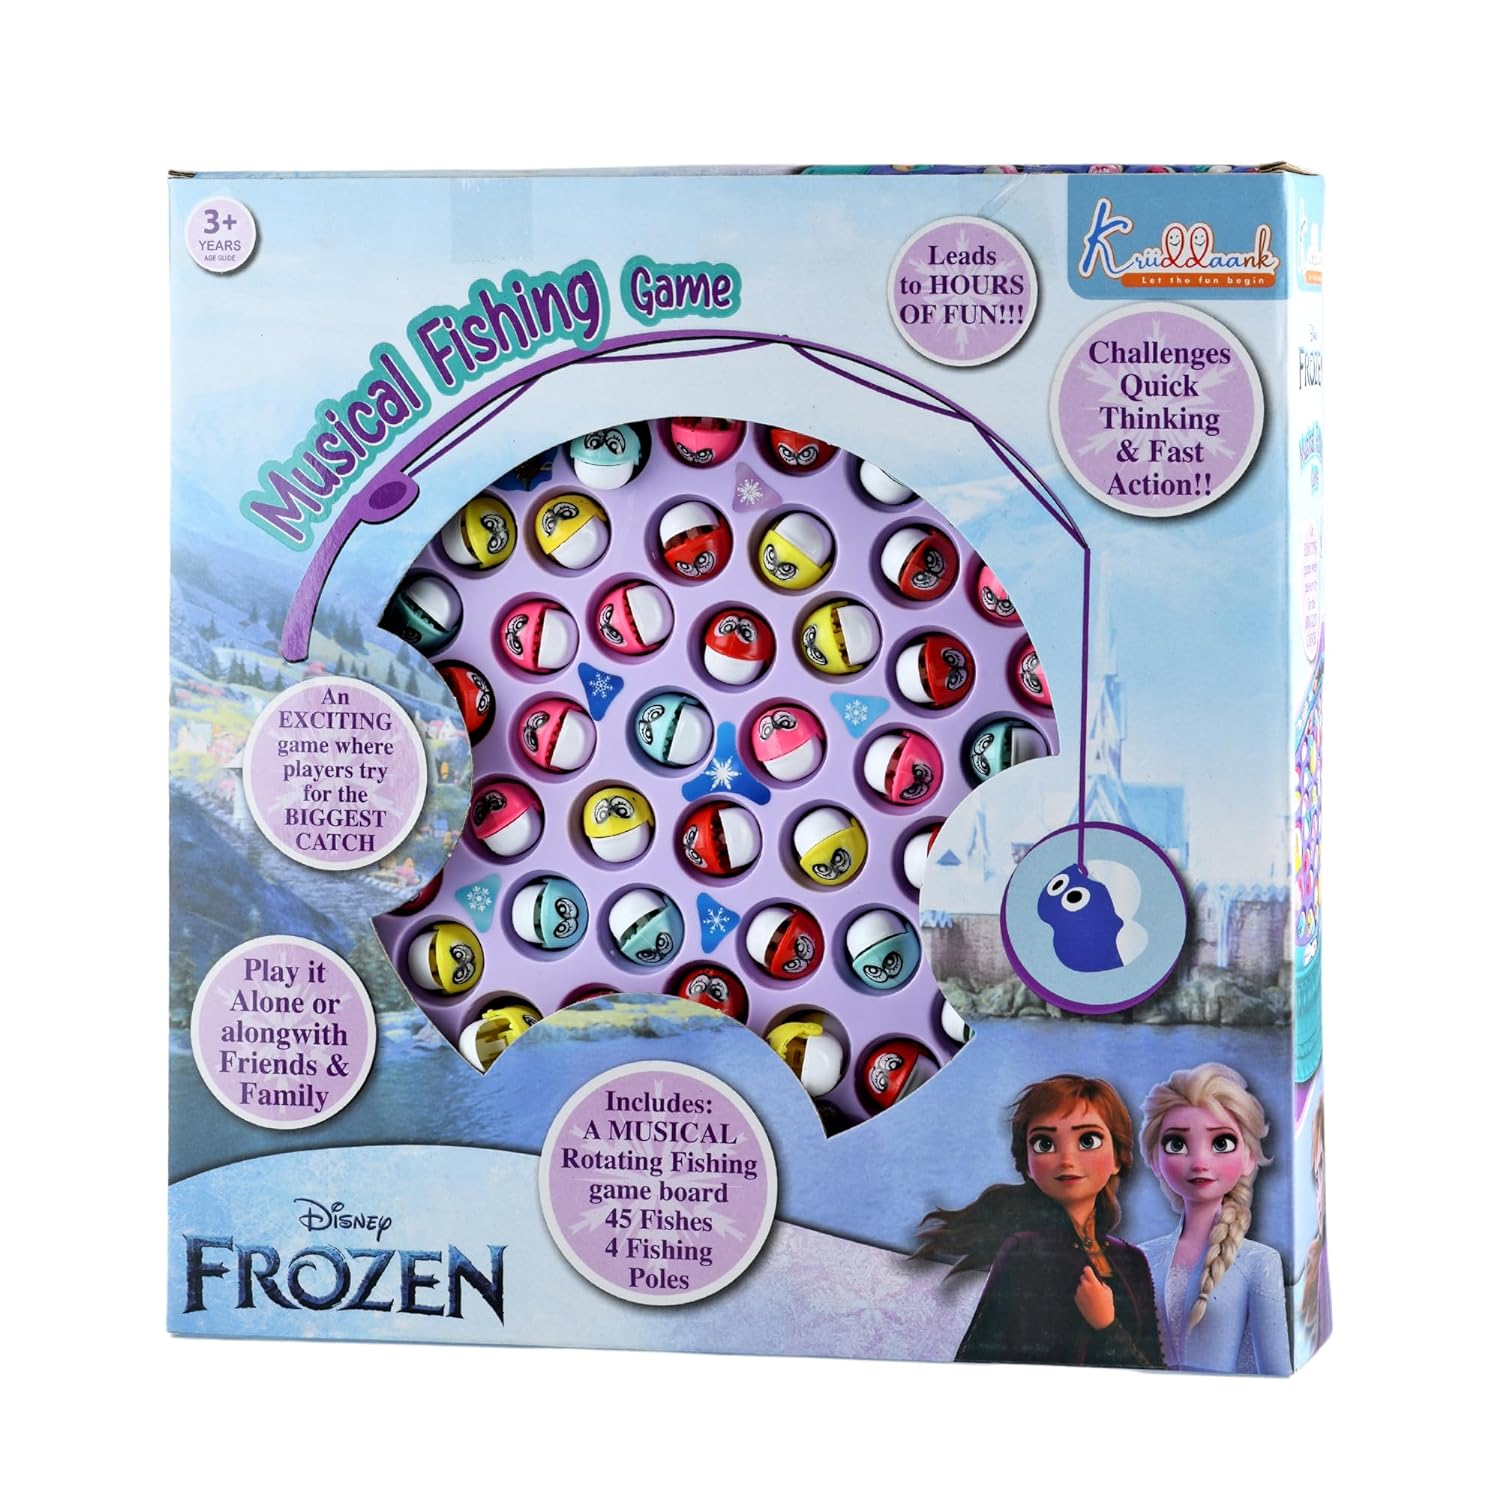 Disney Frozen Musical Fishing Game Fish Catching Board Game Toy 45 Fishes with Big Round Pond & 4 Fish Catching Sticks for Kids